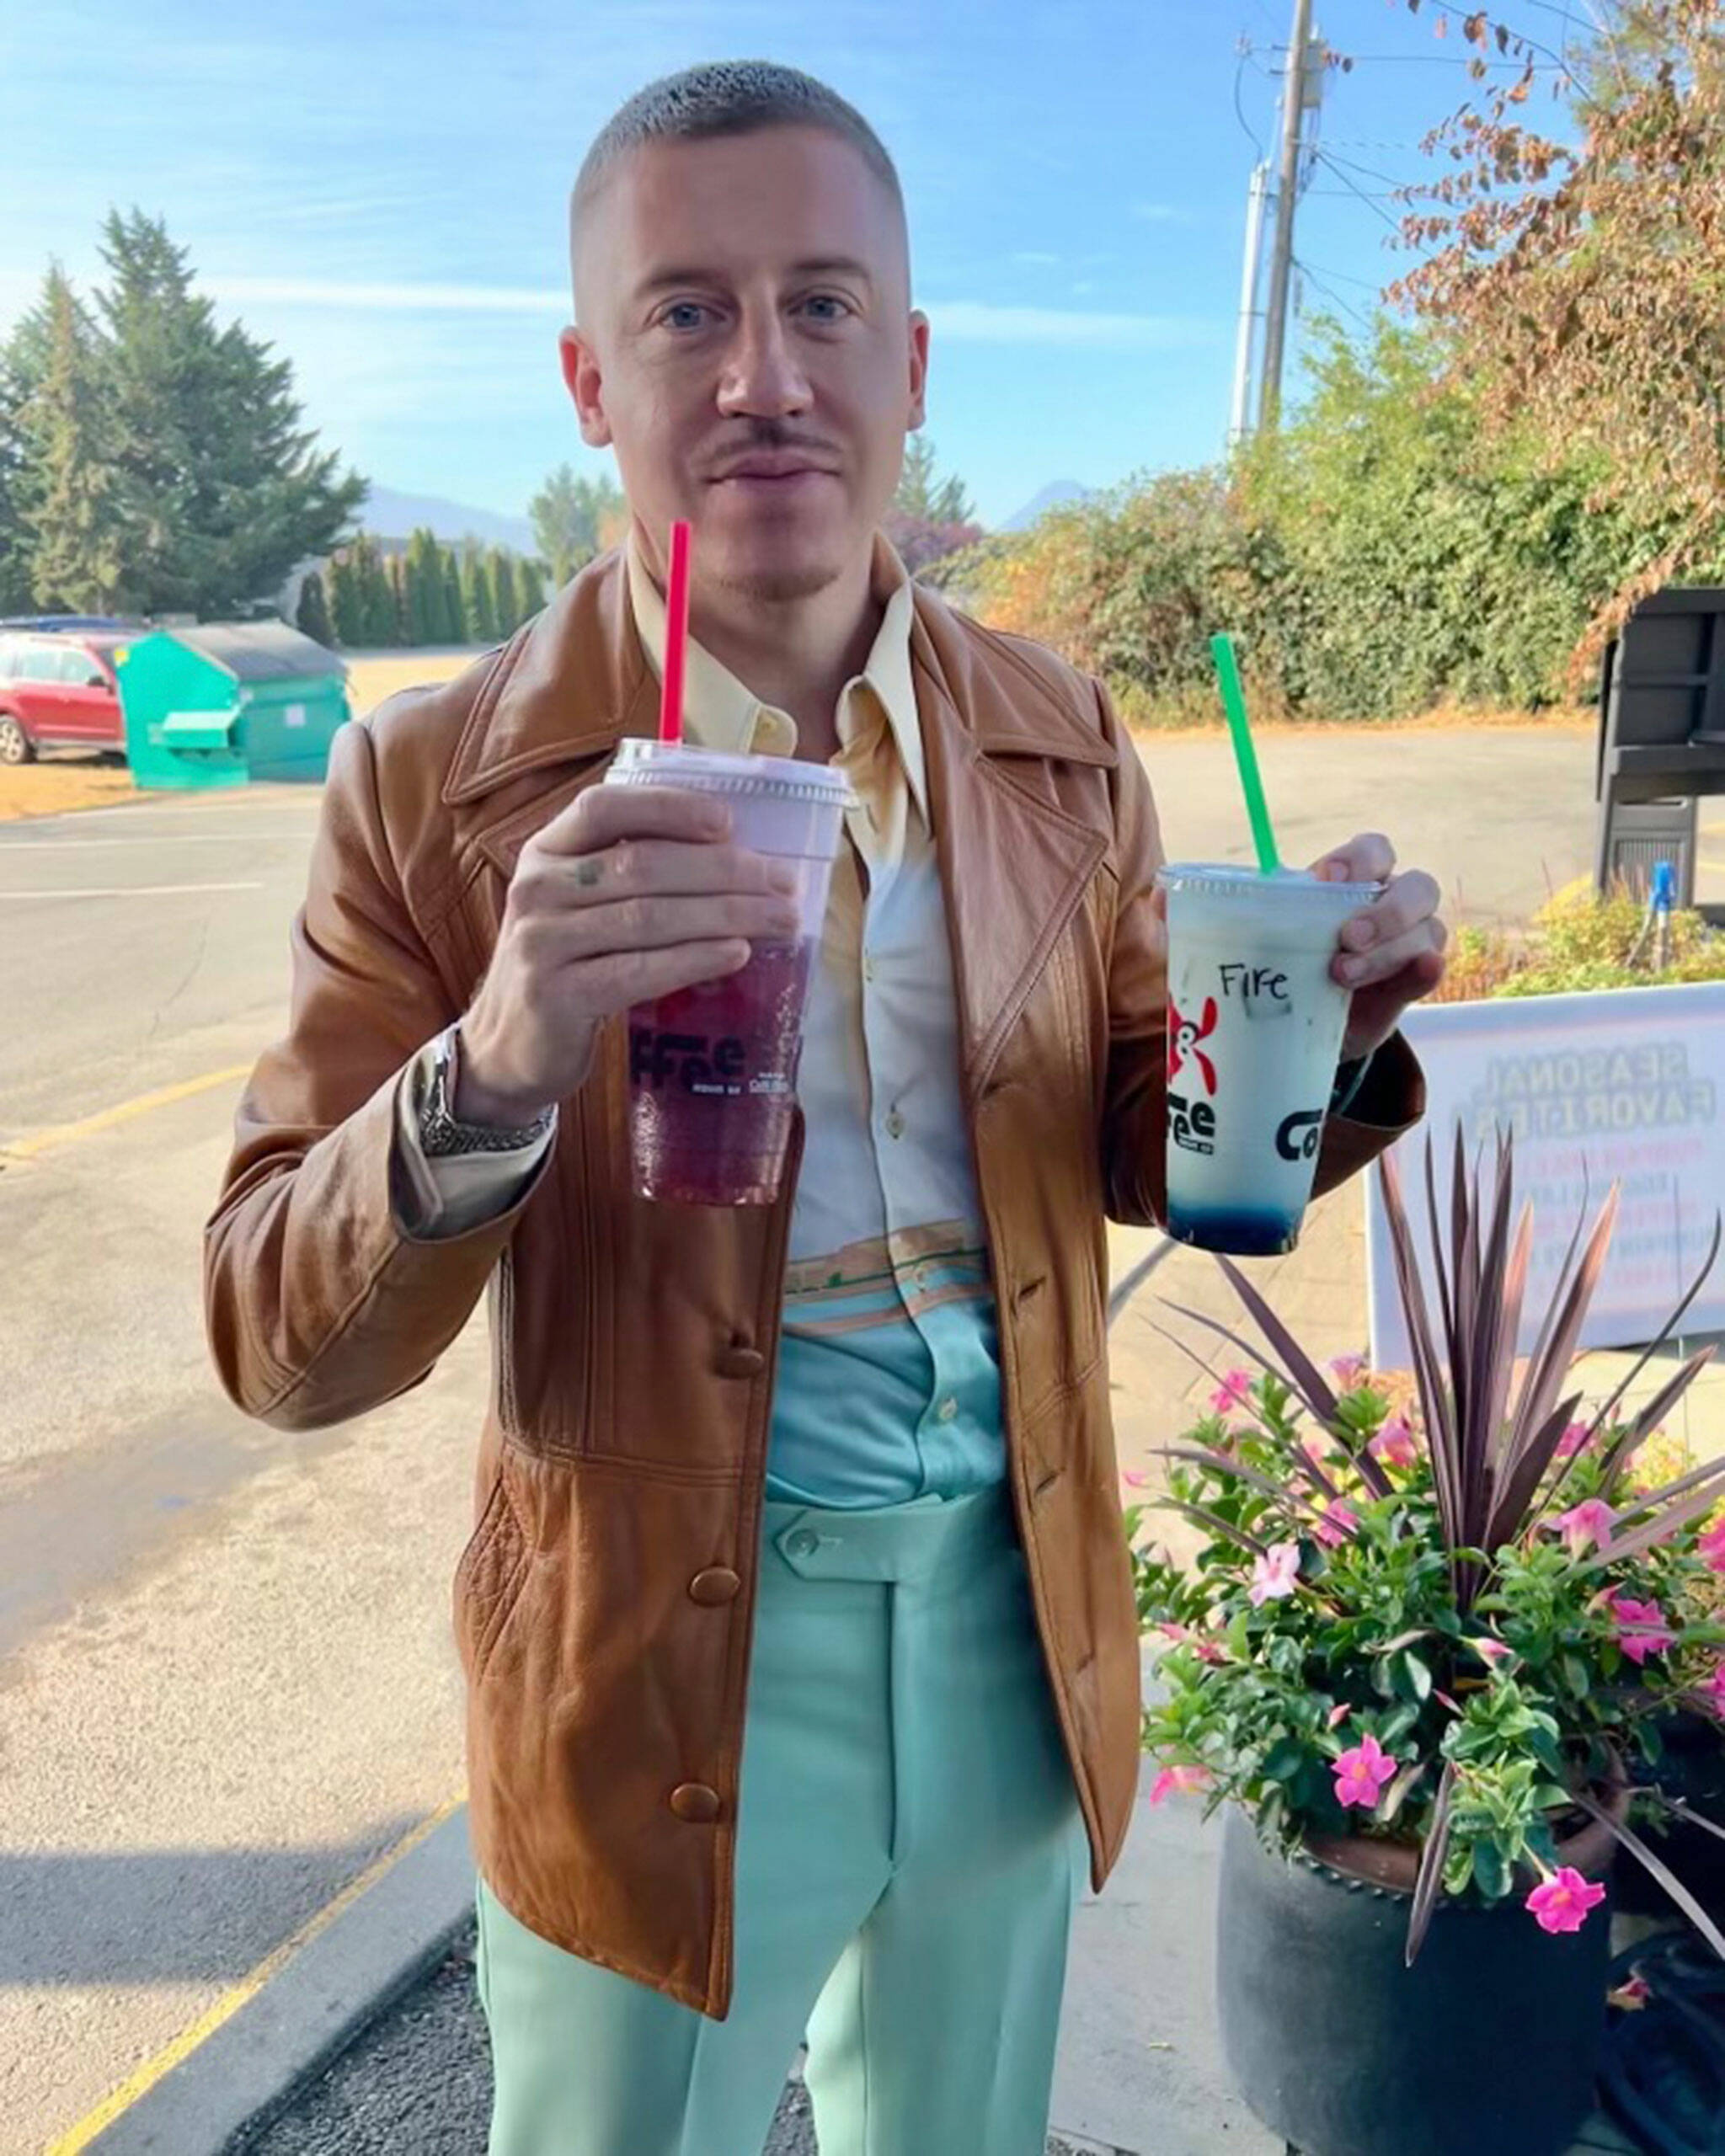 Photo courtesy Kaylee Taylor/ During his stop at Reddog Coffee Co., Macklemore drank a “Dumpster Fire” and “Purple Koosh” spritzer, staff said. He took photos and visited with staff and customers for about 30 minutes on Oct. 19, staff said. He later gave Reddog a 5-star Google review.